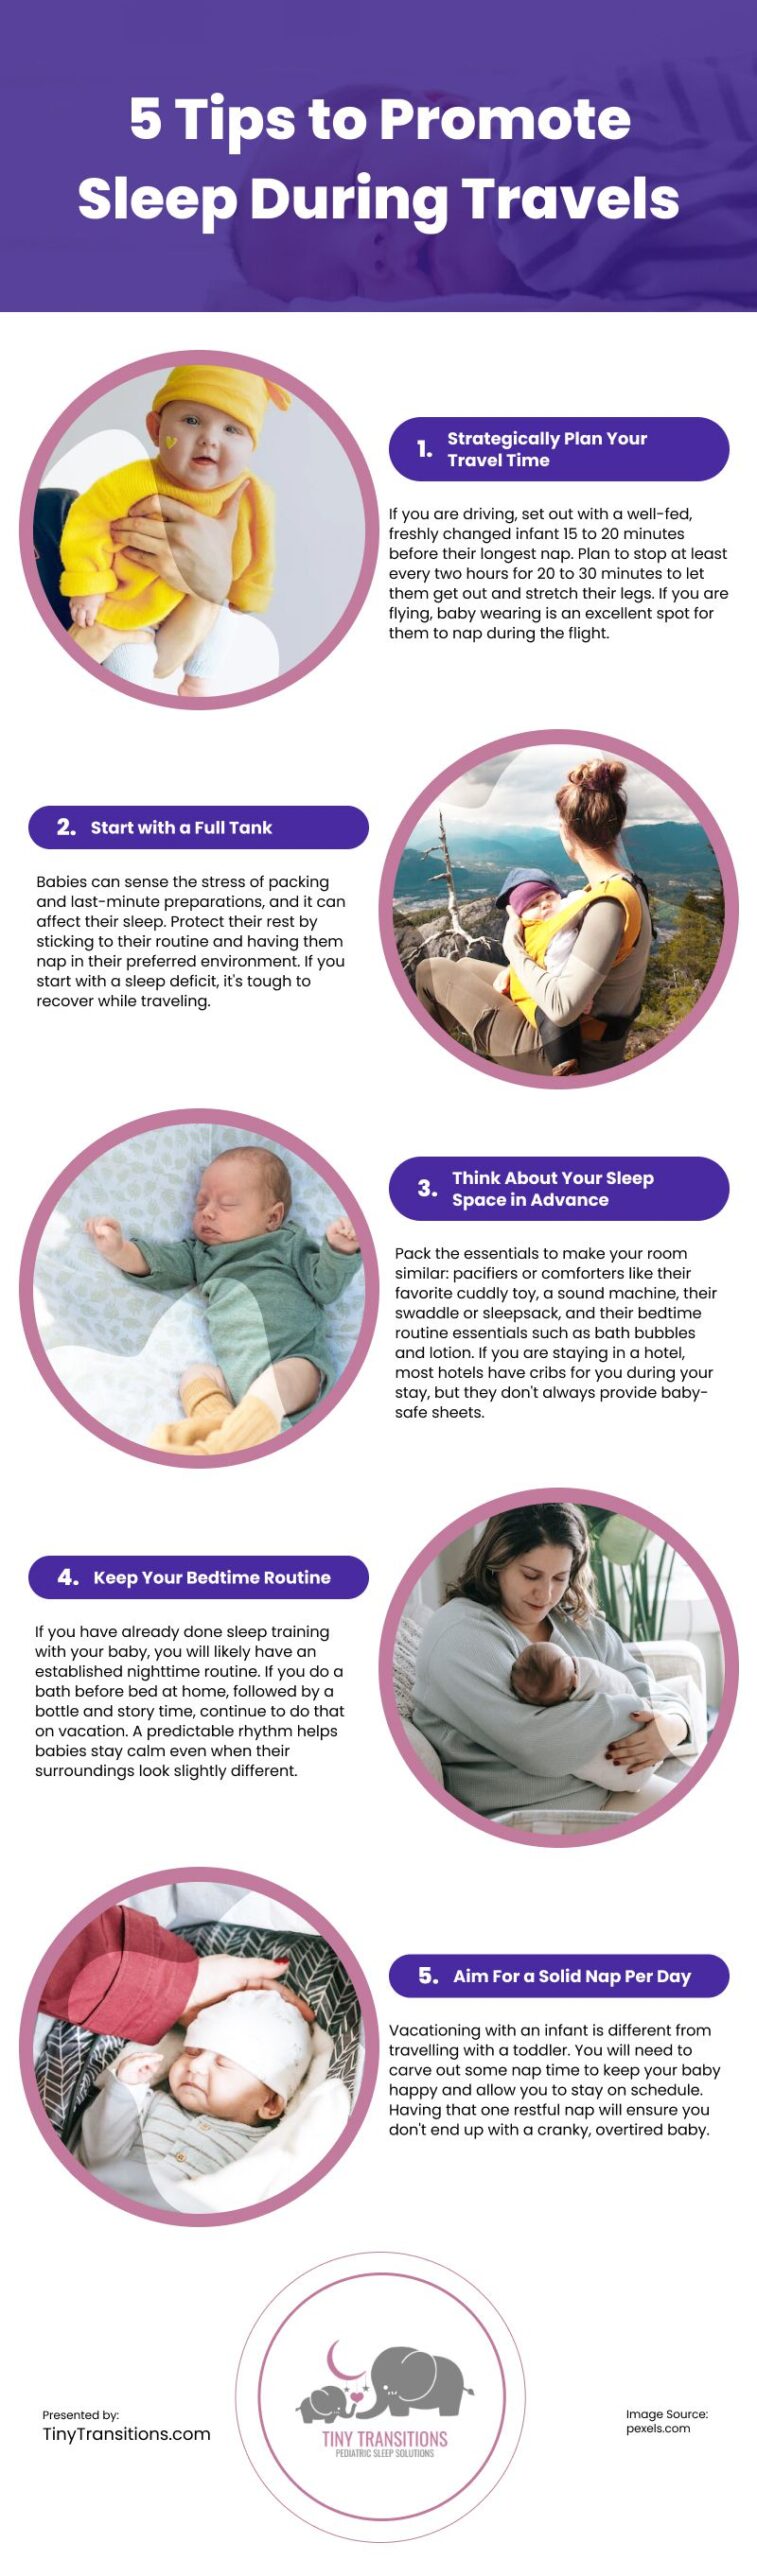 5 Tips to Promote Sleep During Travels Infographic